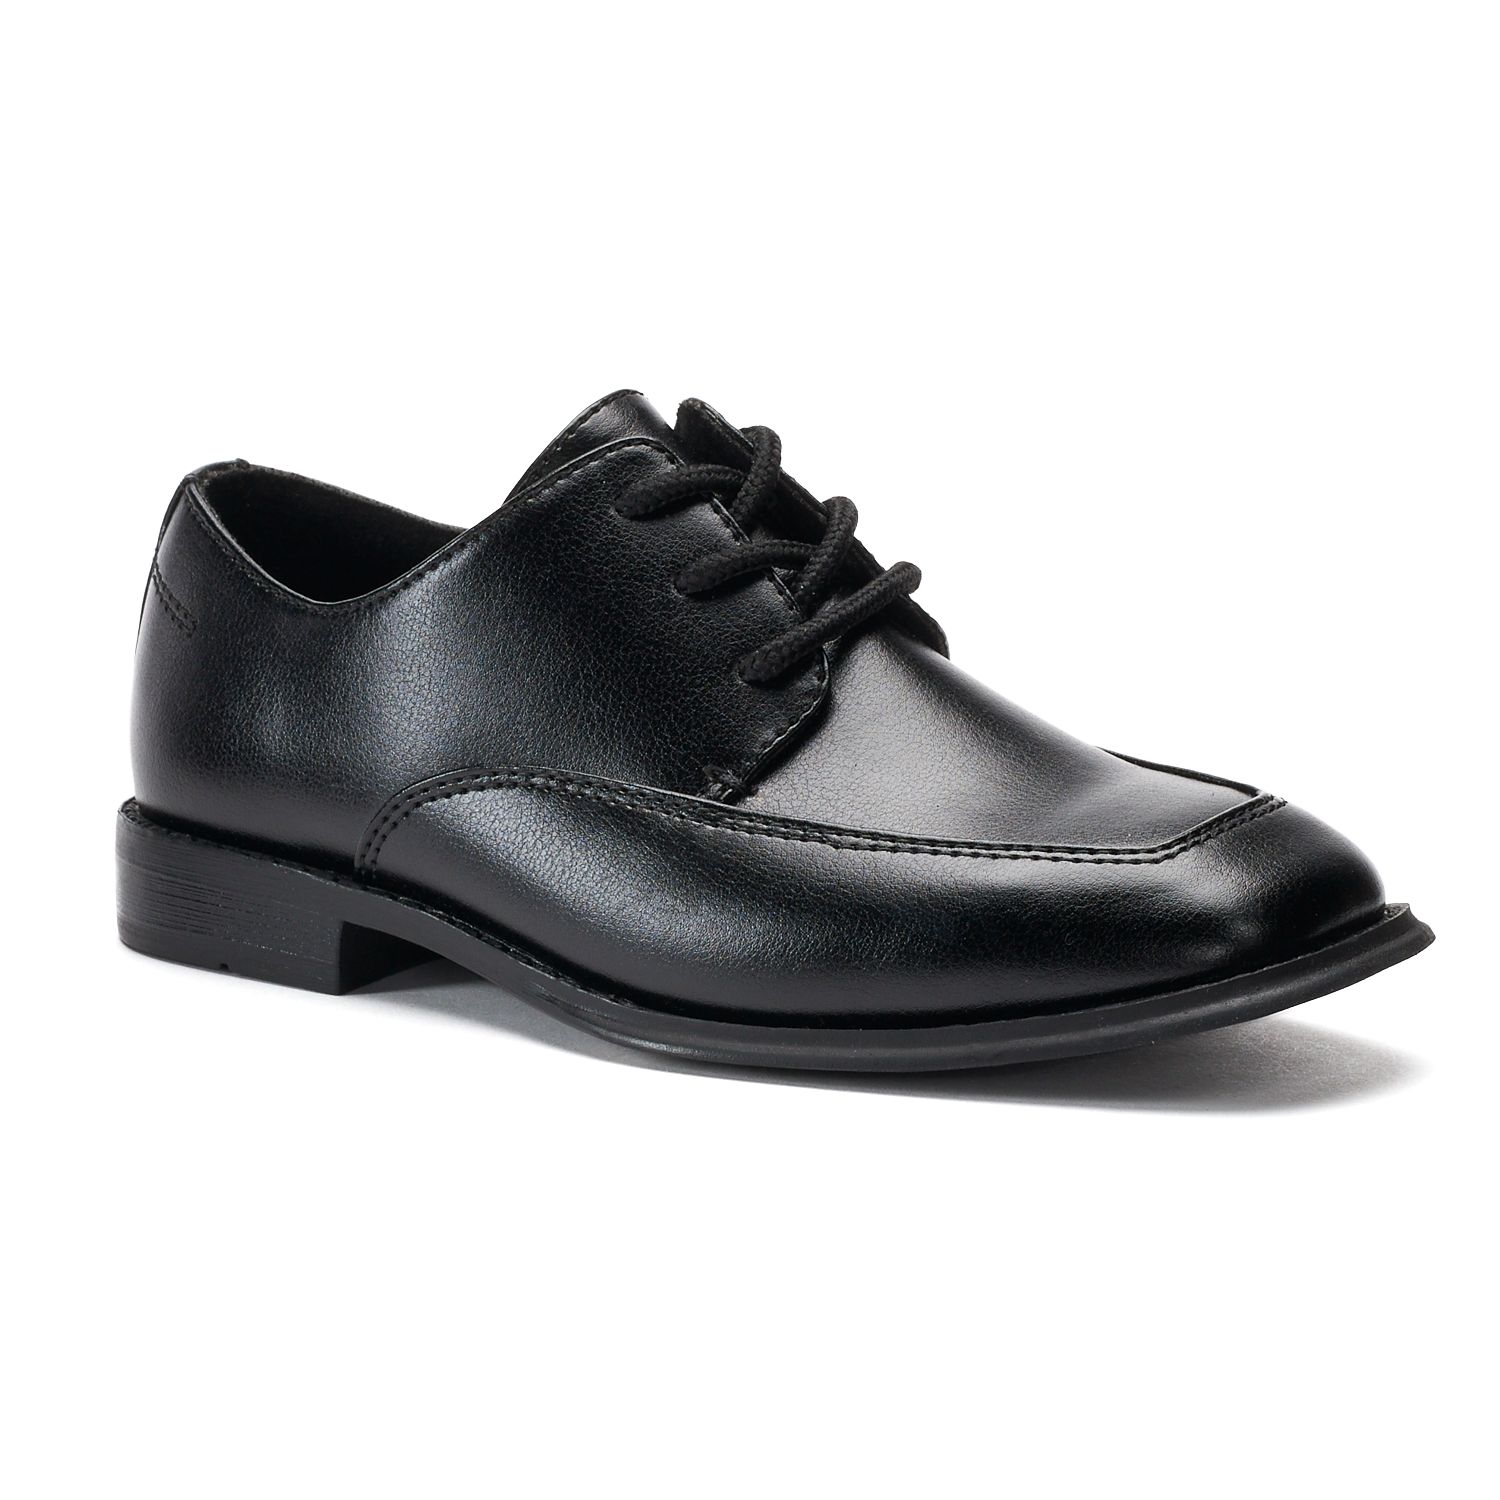 dress shoes for kids